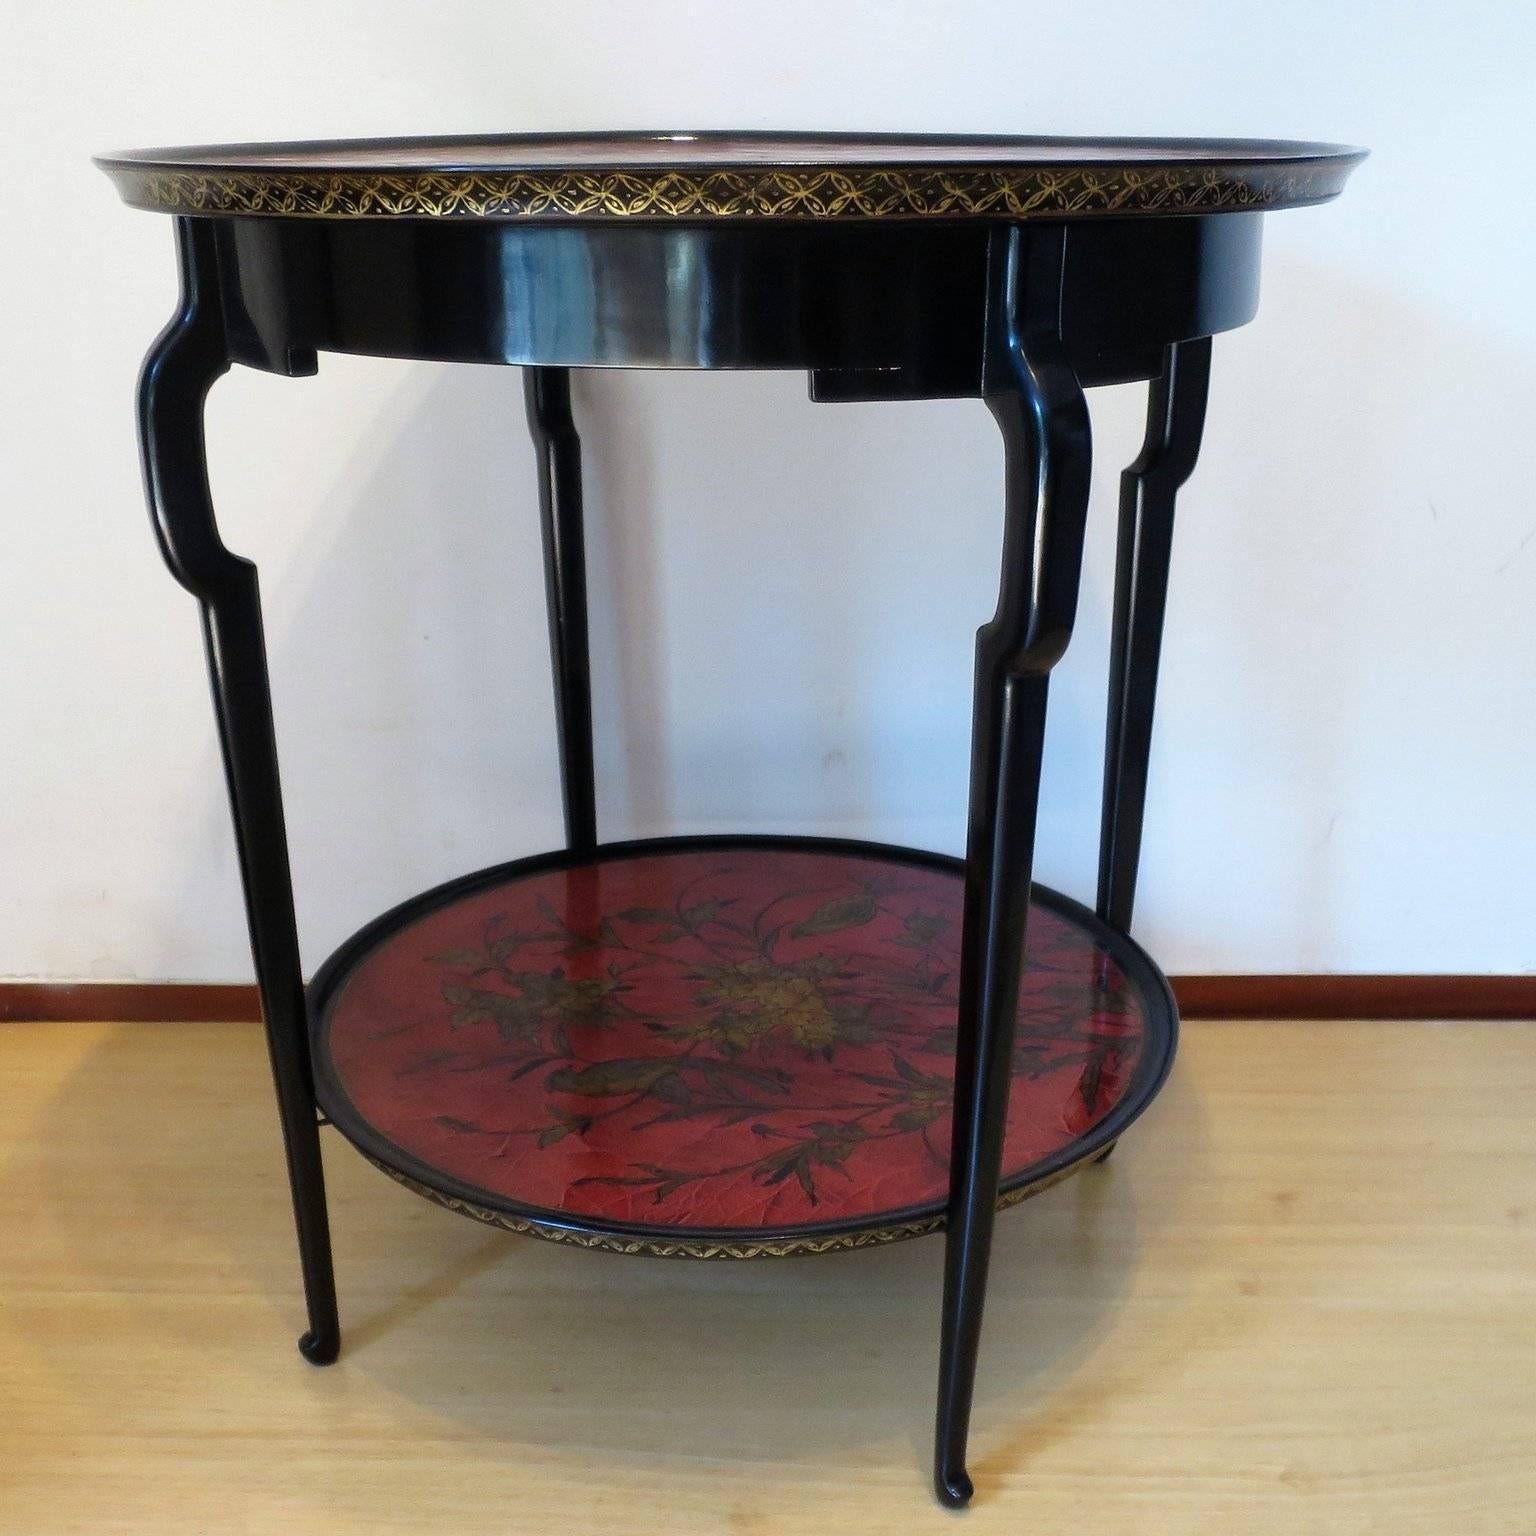 Very Chic Jansen design, the elegant shape of the legs are supporting two red lacquer Tops decorated with birds and flowers.
The structure is in a black lacquer.
Very unique and elegant design.